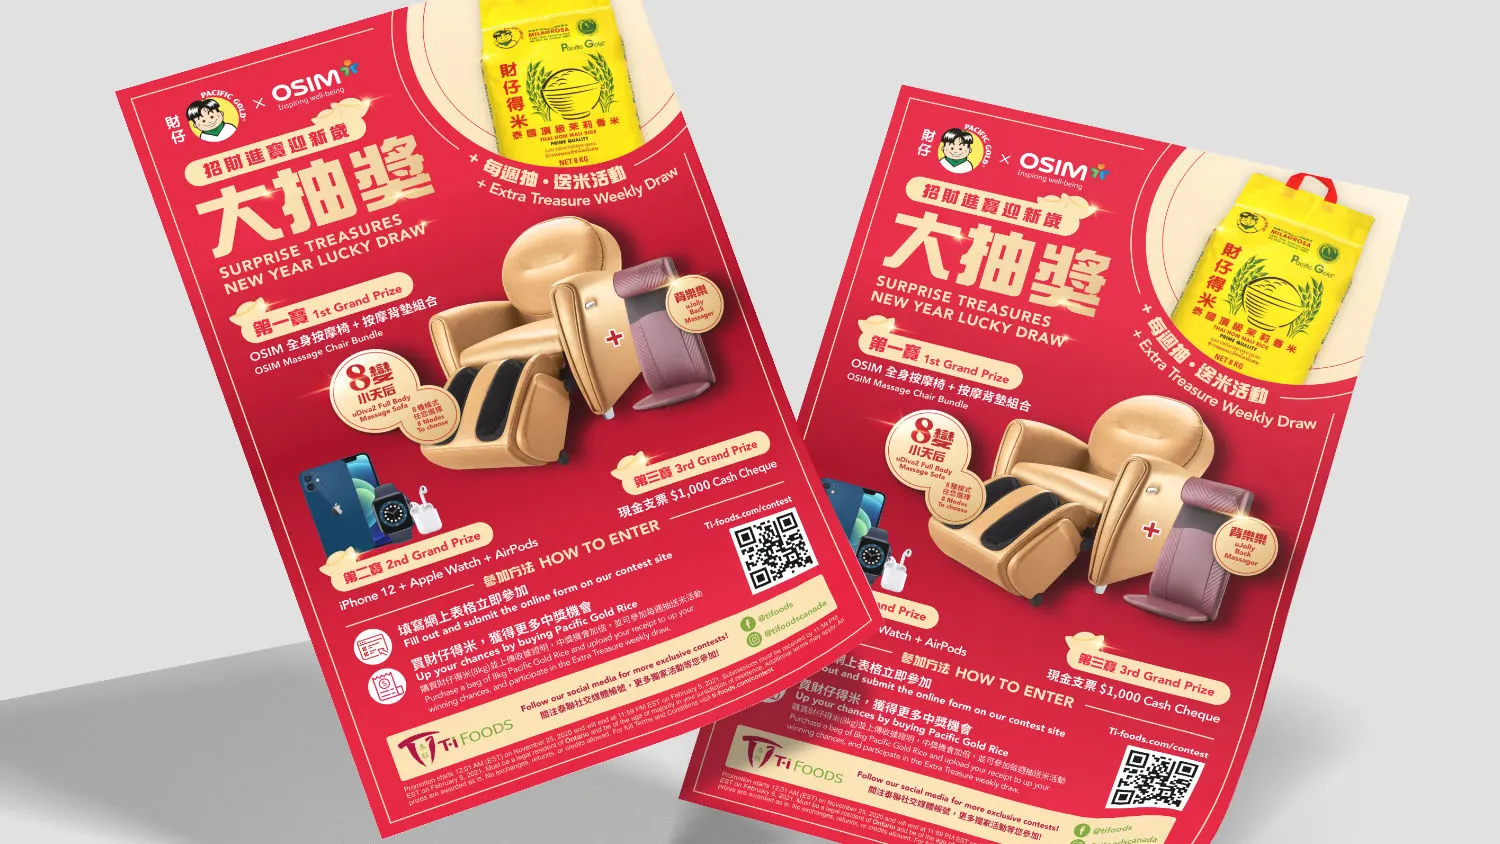 Graphic design project for TI Foods 泰聯貿易. Designed banners to promoto joint contest event